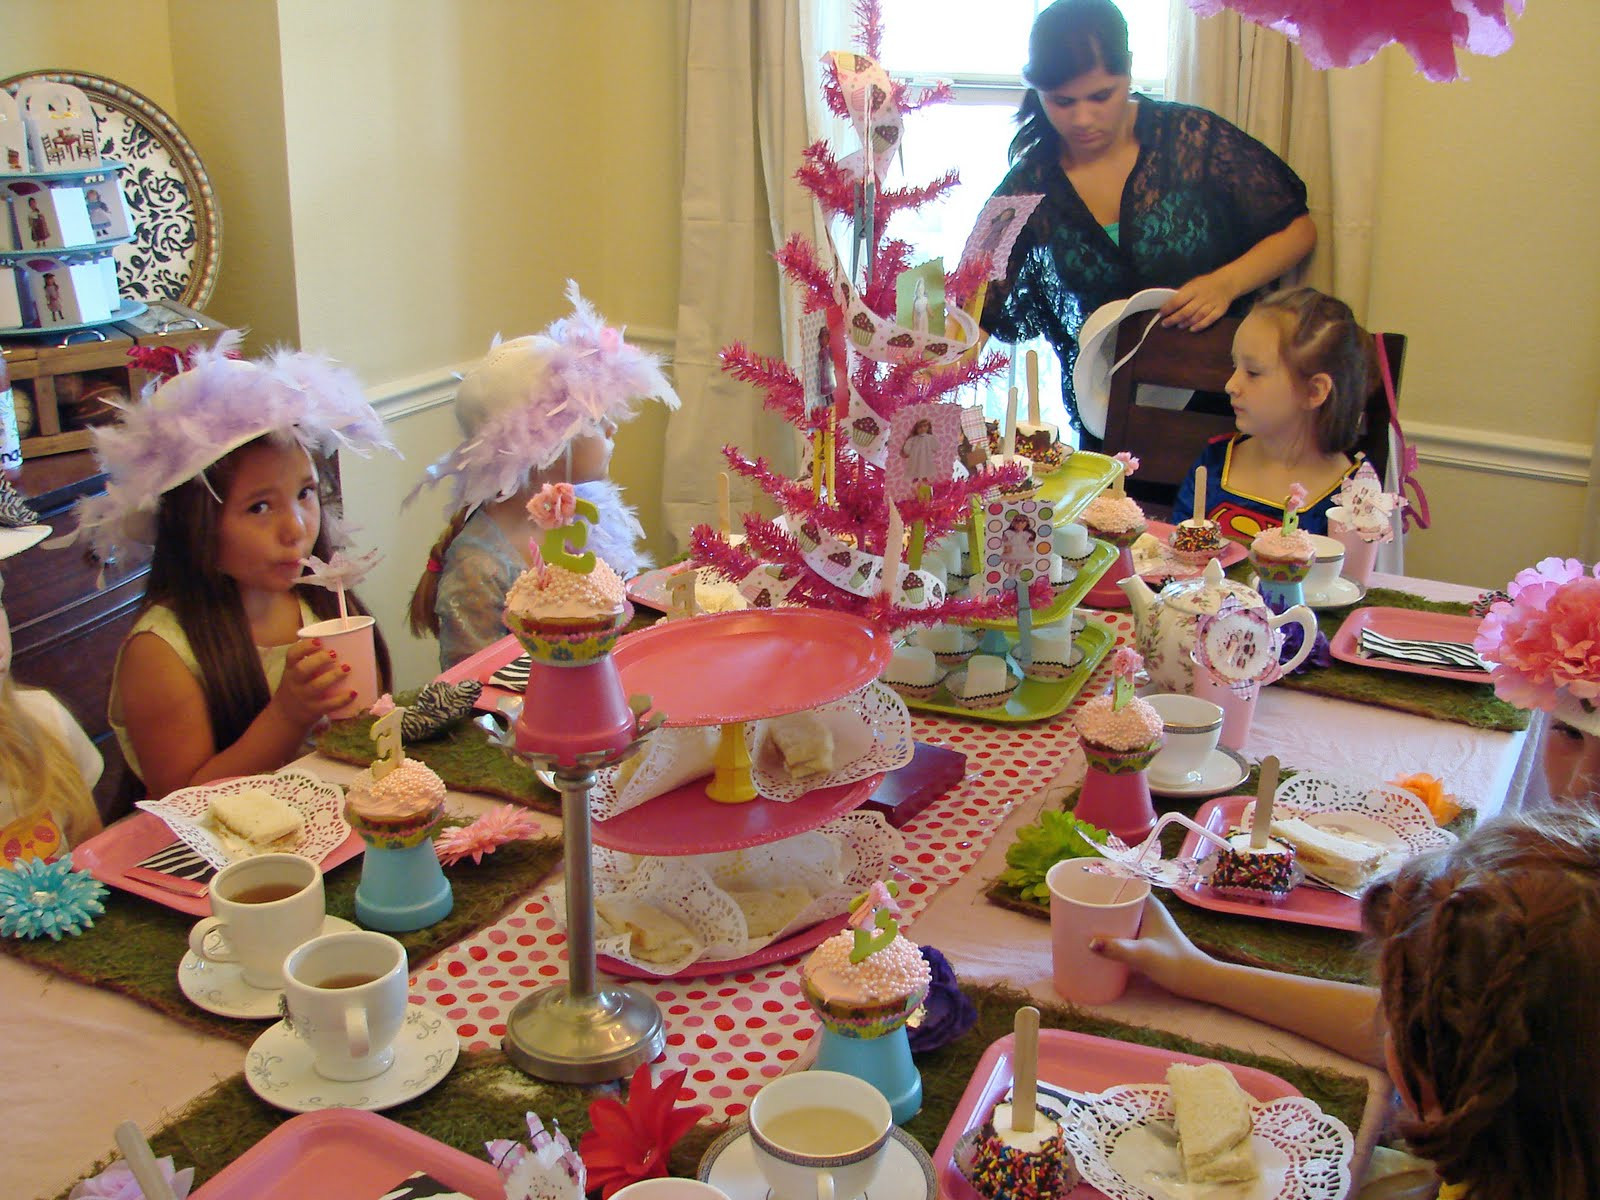 American Girl Tea Party Ideas
 That s Life Kid Emma s American Girl Tea Party